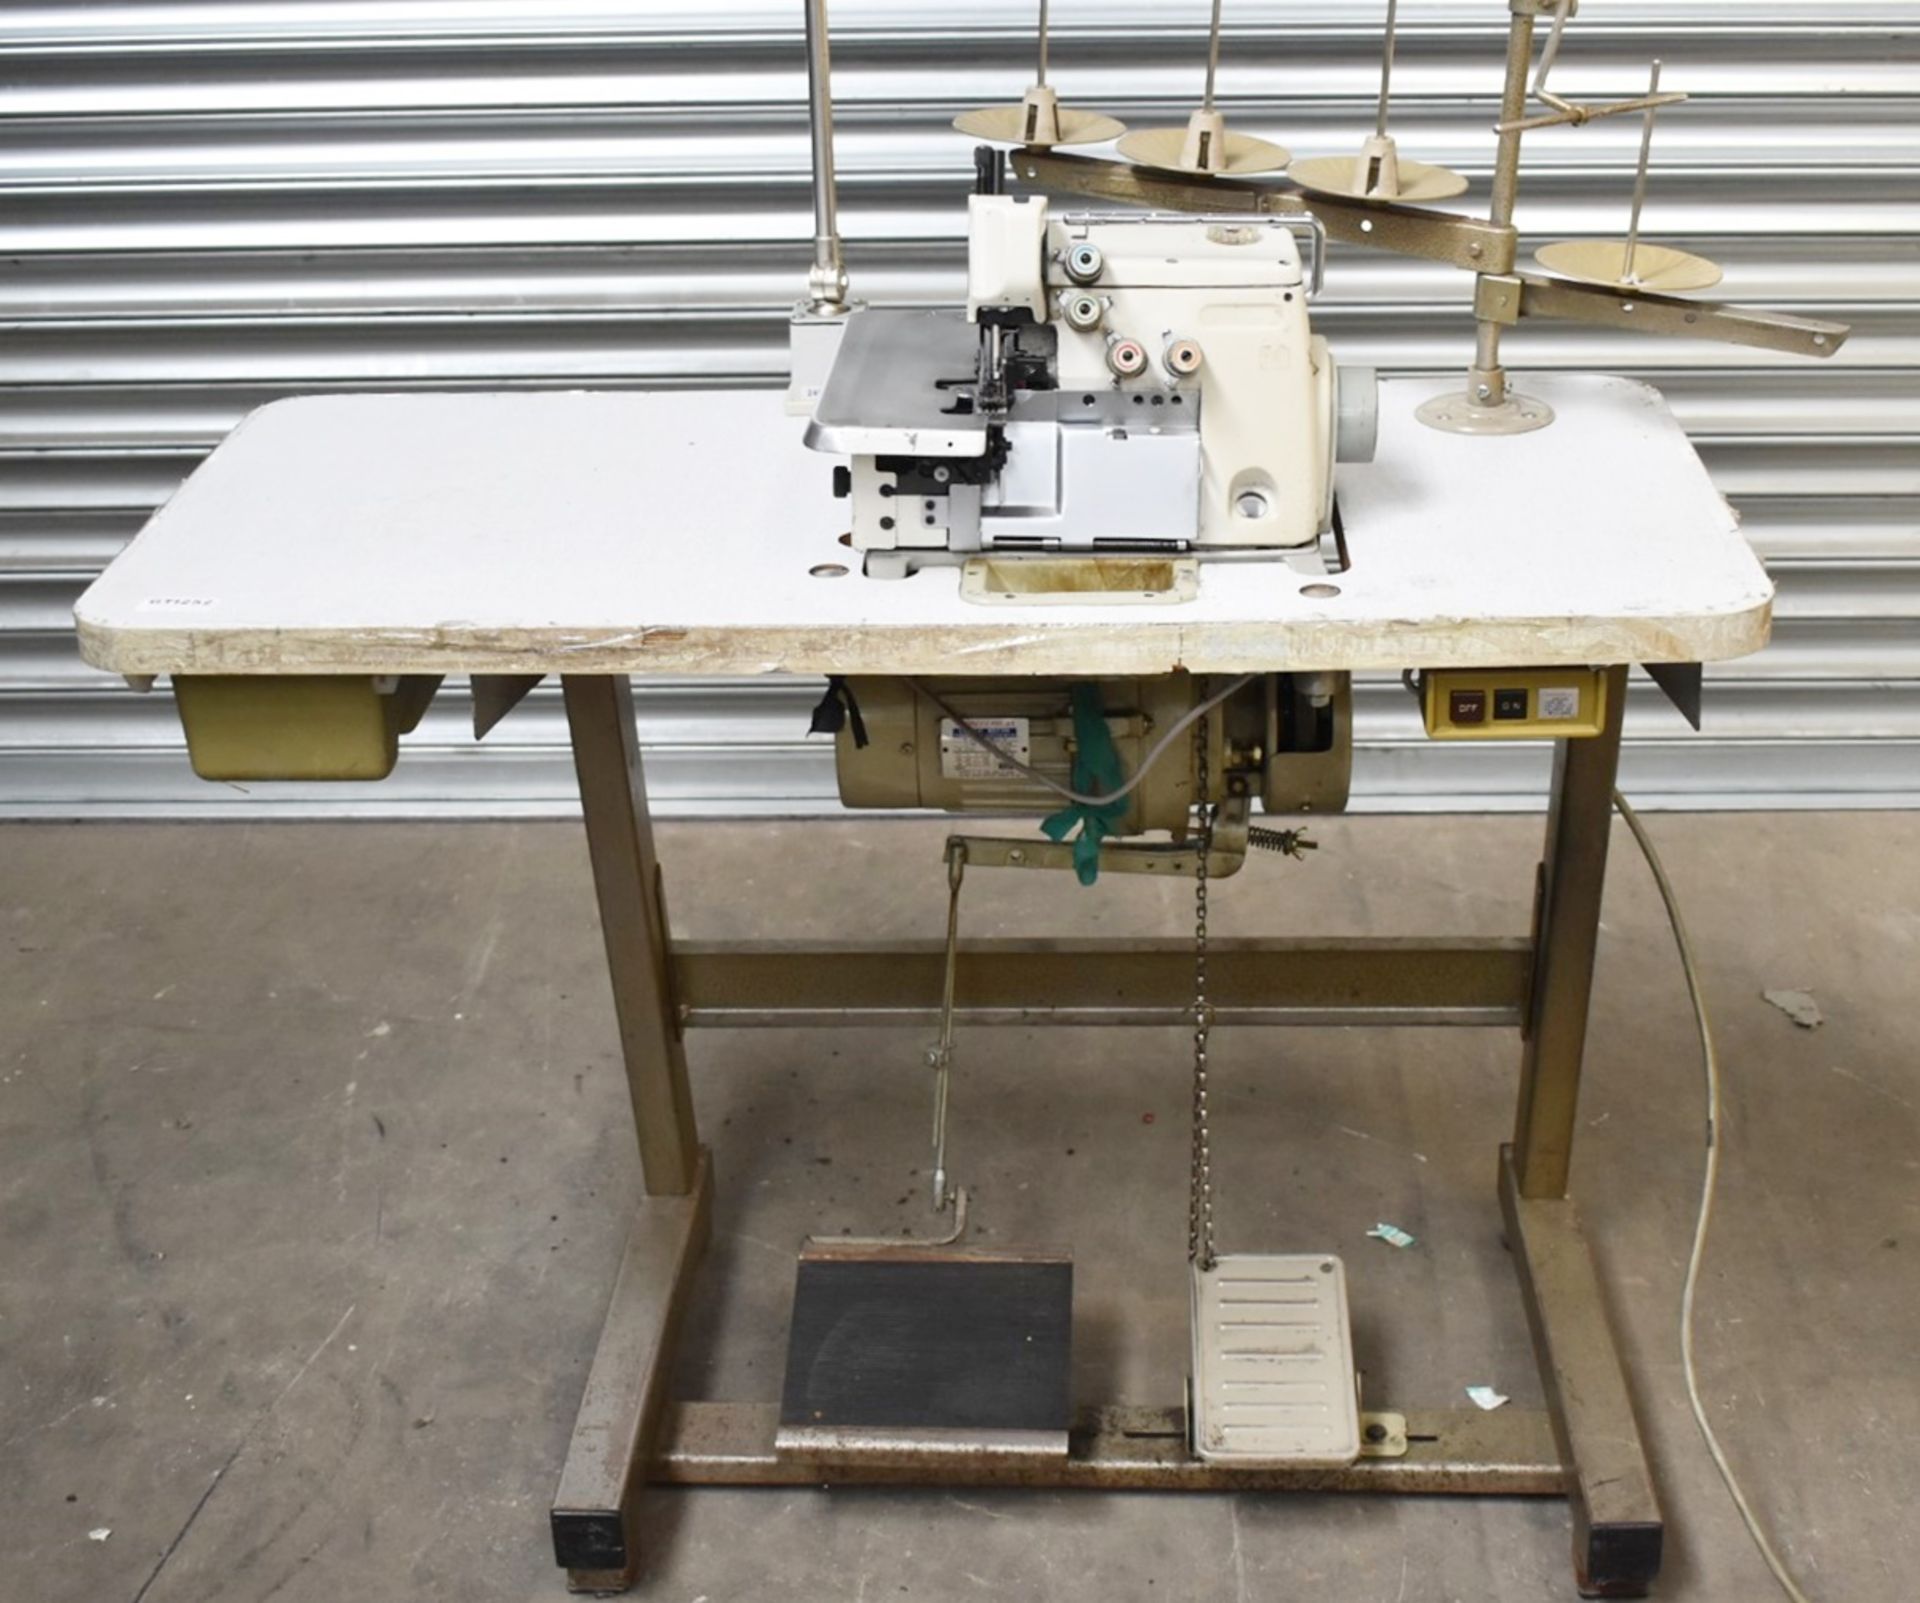 1 x Brother Overlock Industrial Sewing Machine - Model EF4-B531 - Image 3 of 27